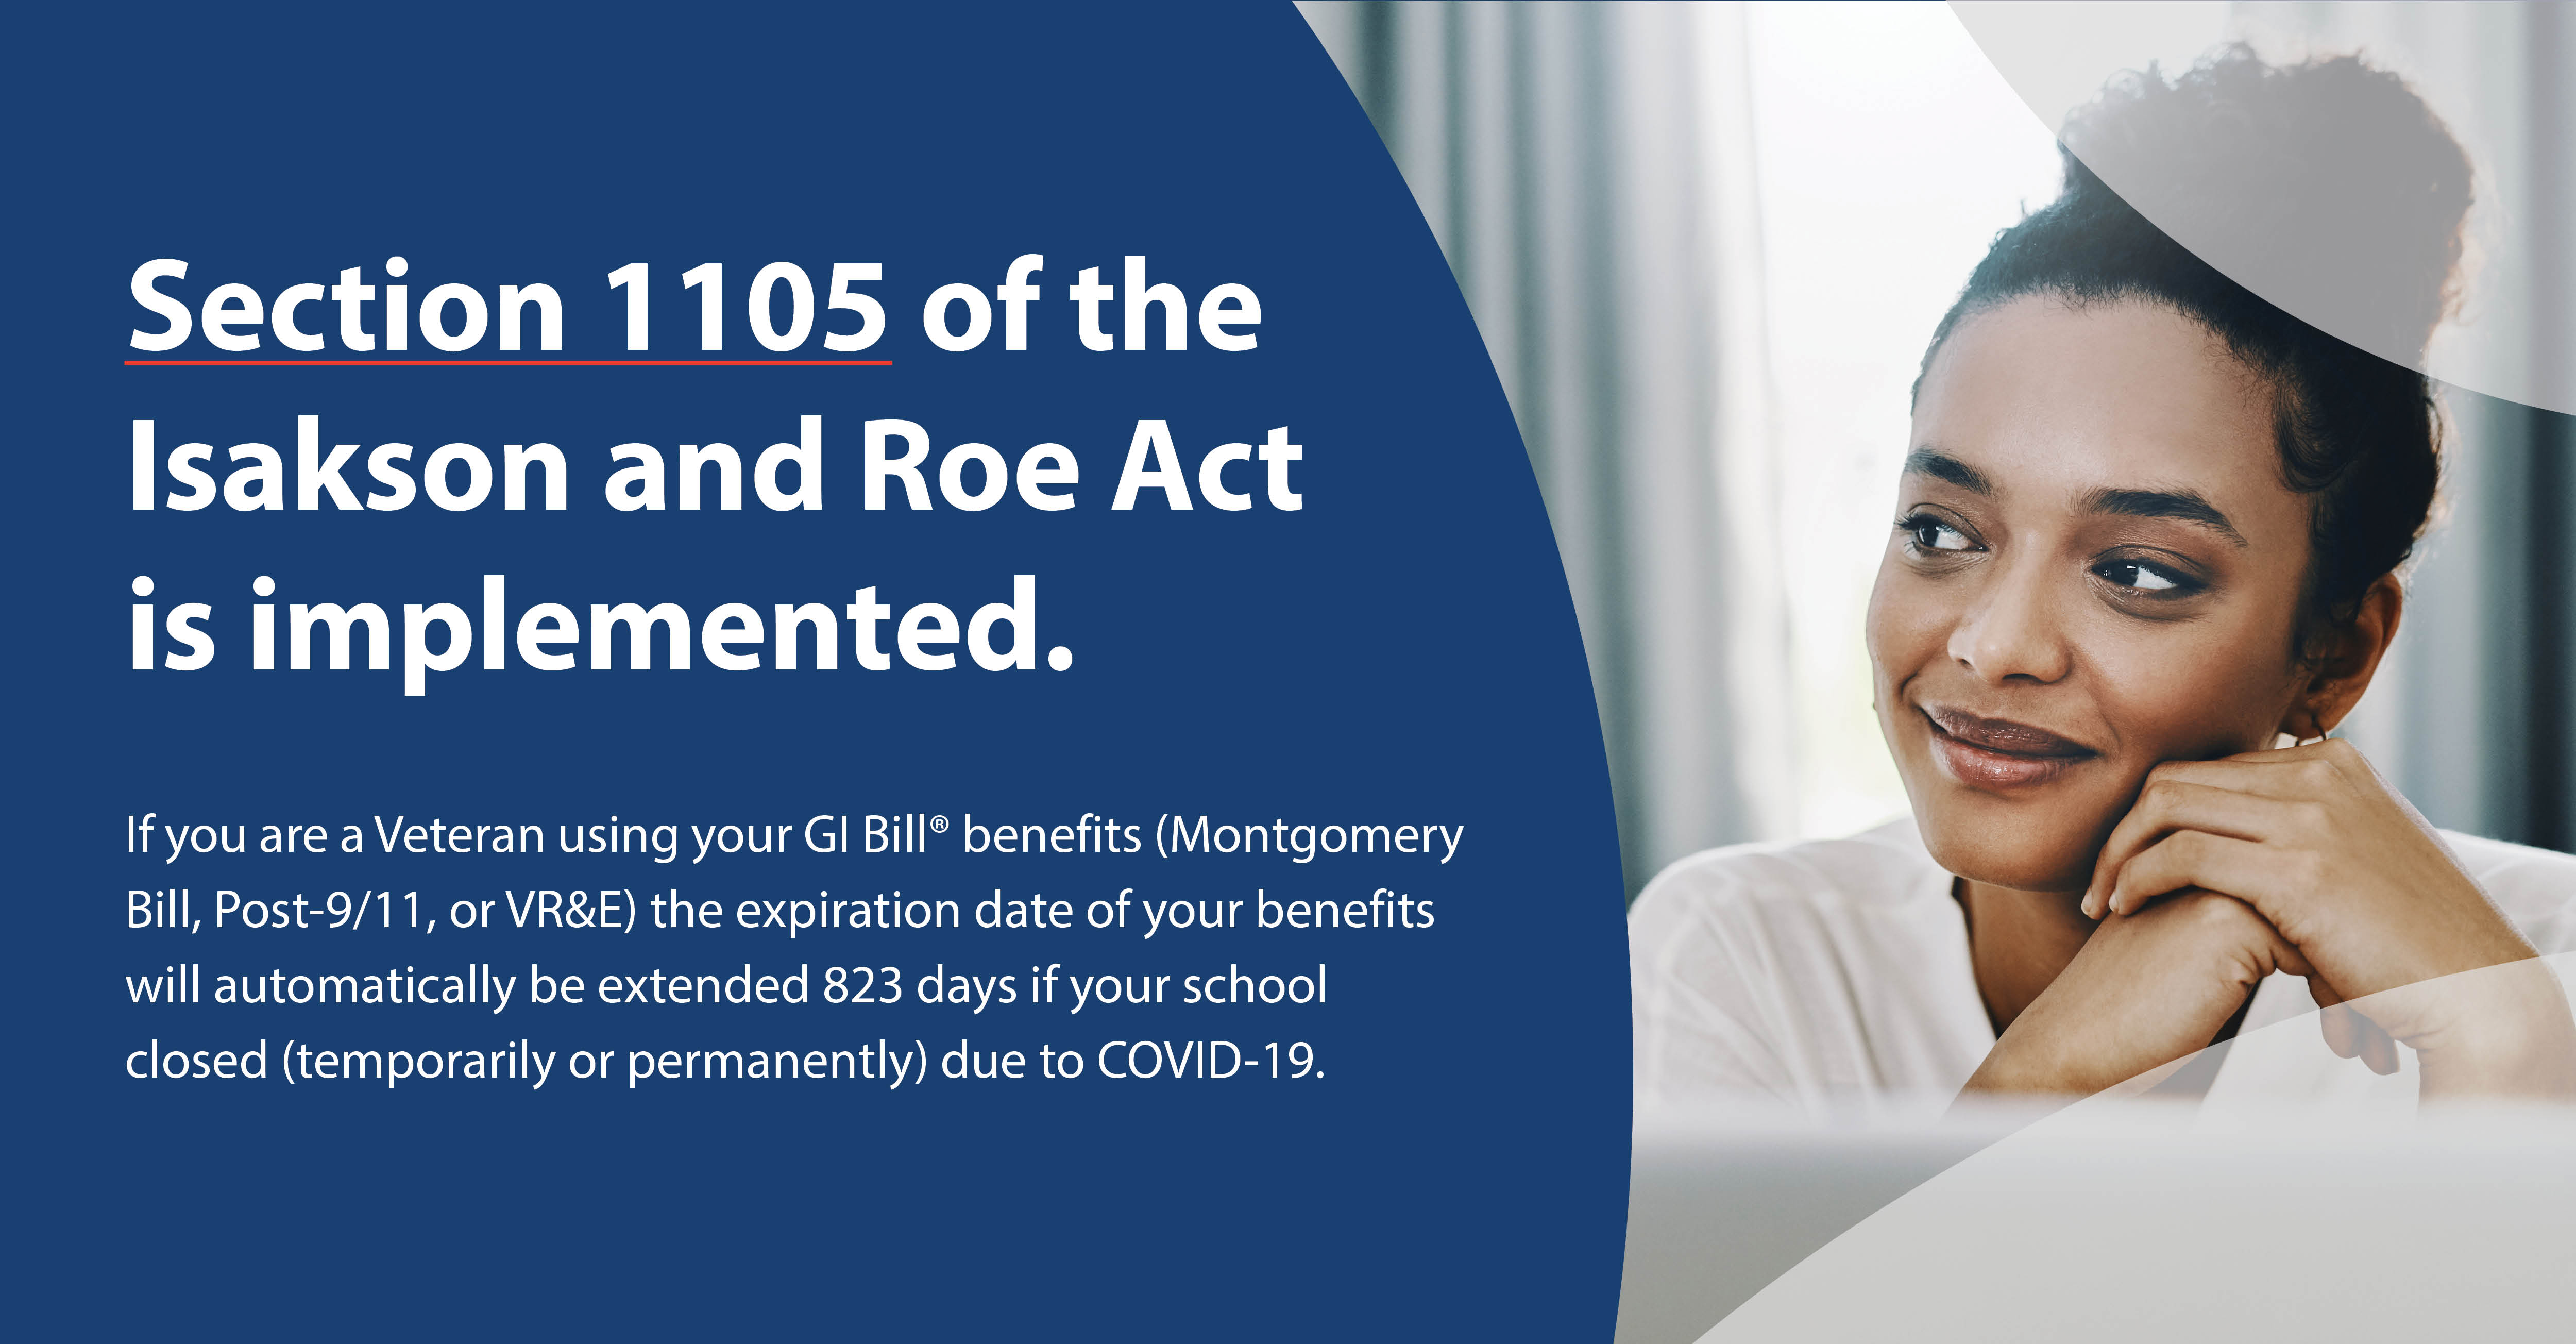 Image - Young woman smiling.  Content - Section 1105 of the Isakson and Roe Act is implemented.
If you are a Veteran using your GI Bill® benefits (Montgomery Bill, Post-9/11, or VR&E) the expiration date of your benefits will automatically be extended 823 days if your school closed (temporarily or permanently) due to COVID-19.